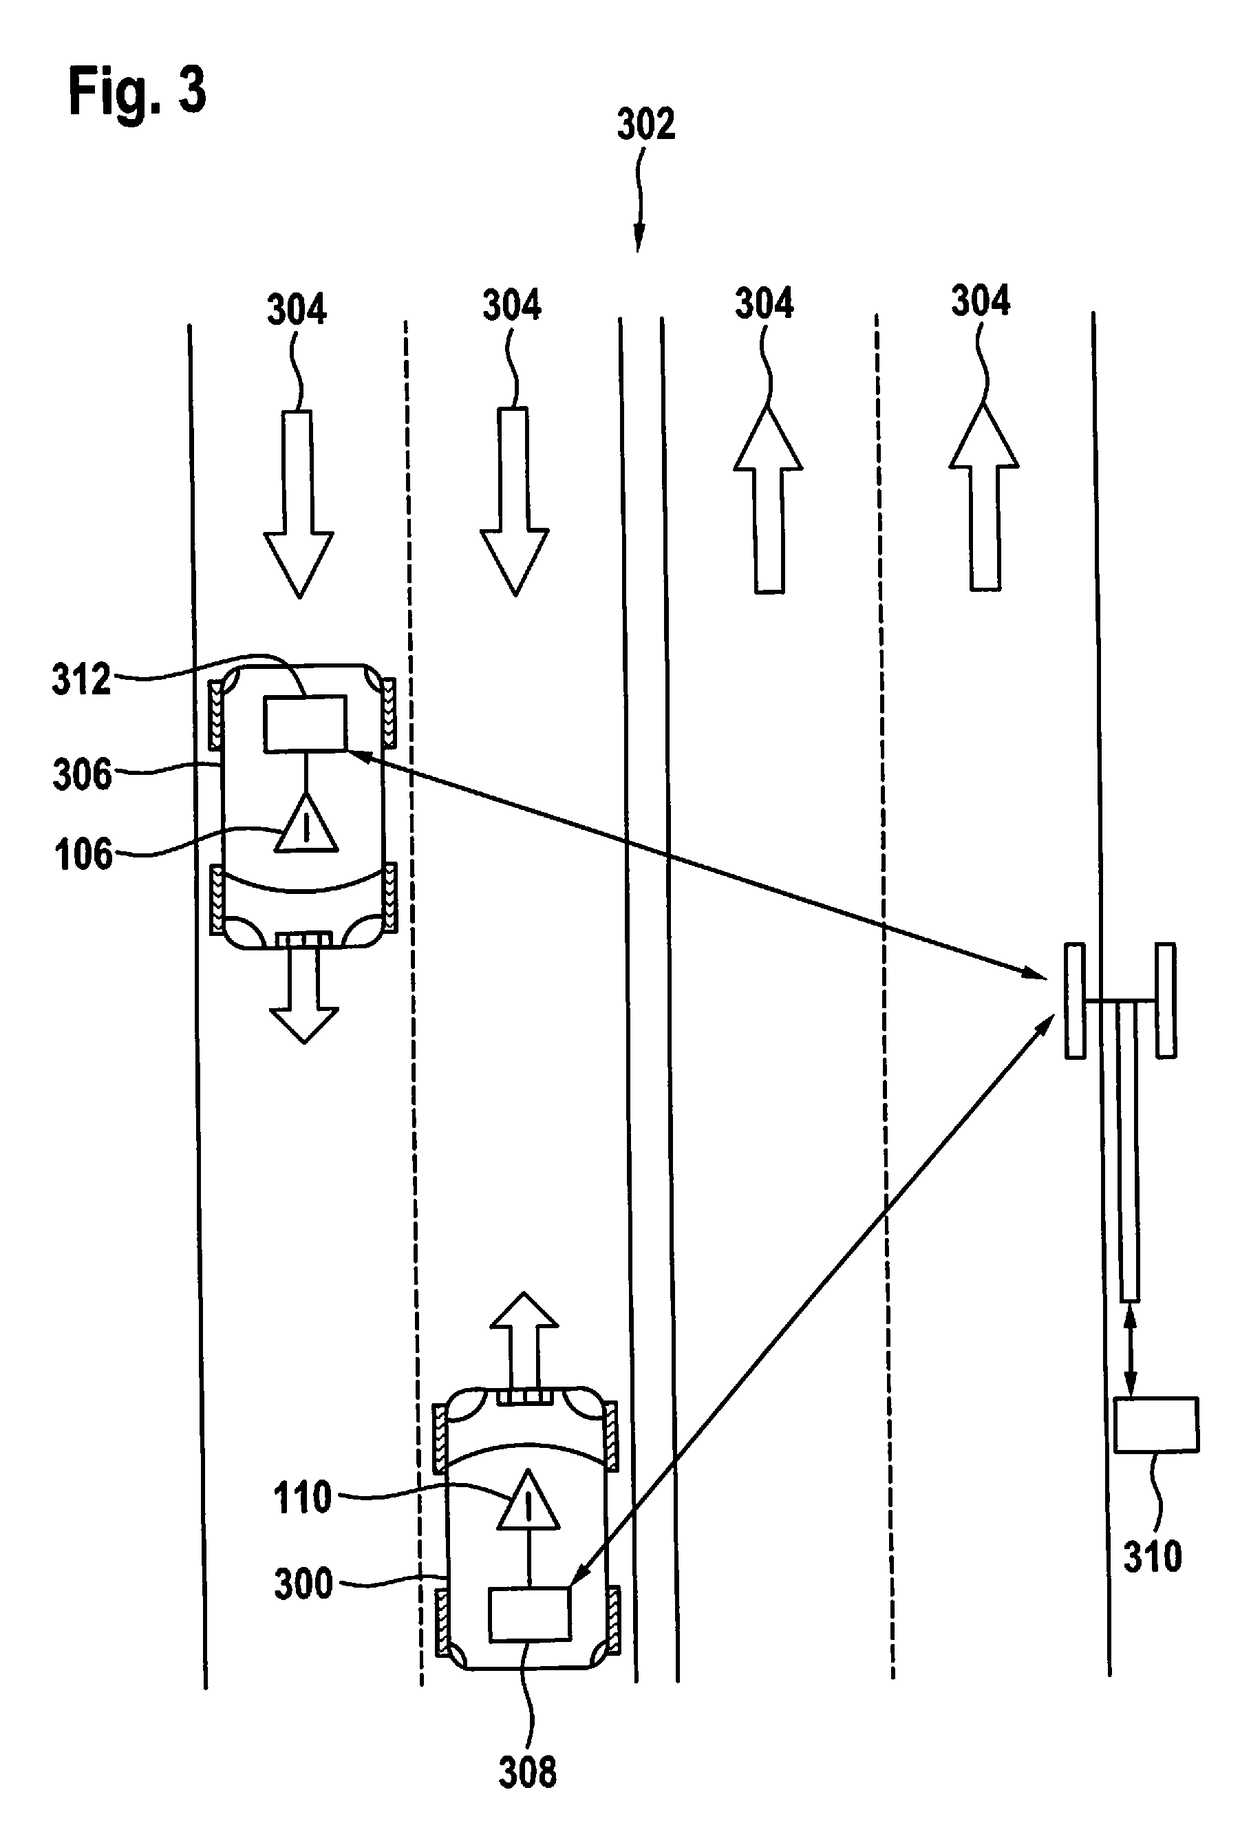 Method and apparatus to warn of a vehicle moving in the wrong direction of travel